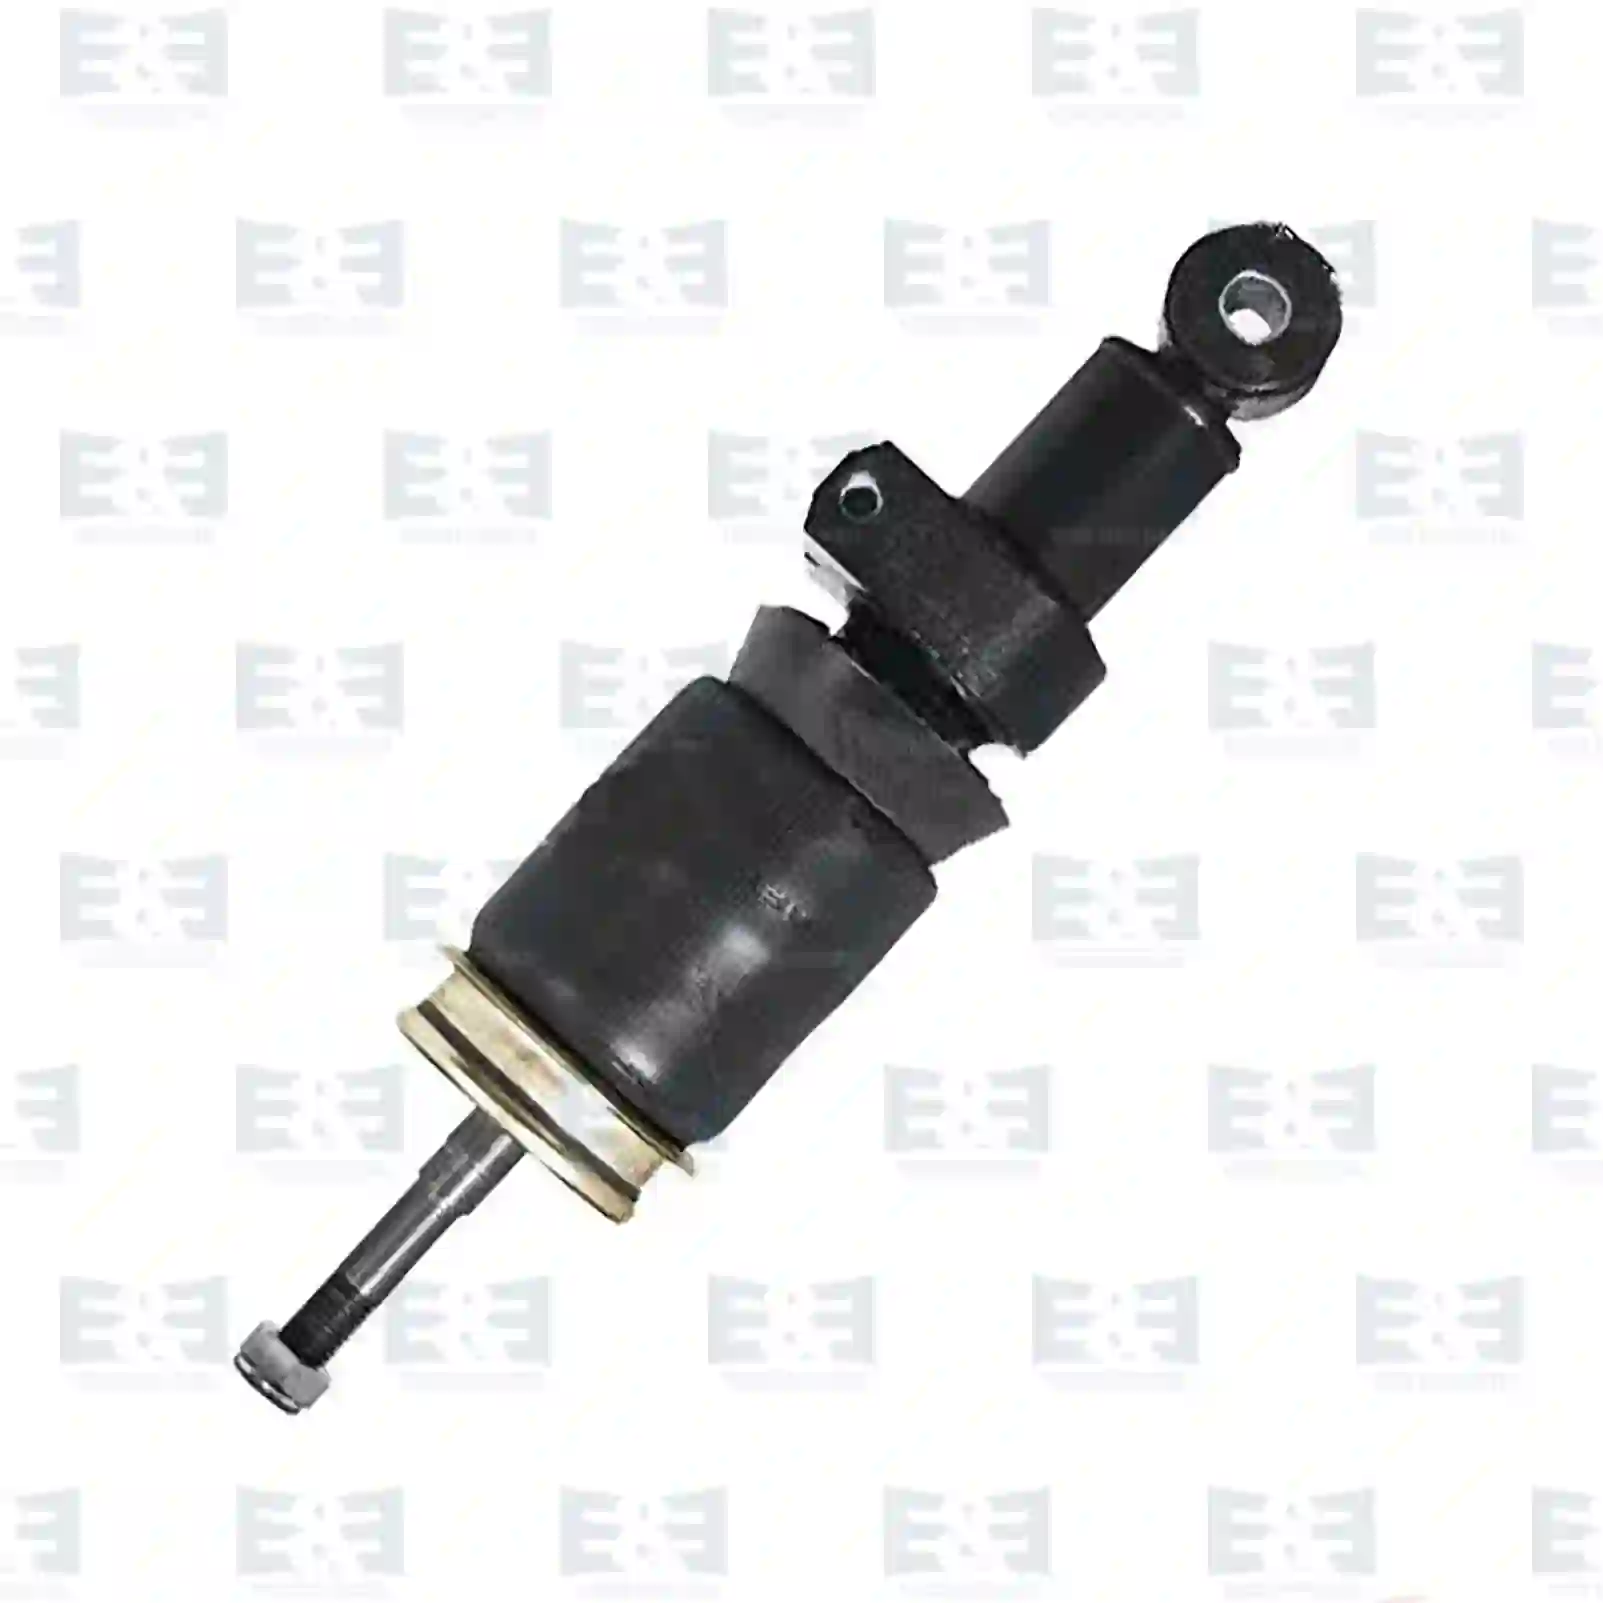 Cabin shock absorber, with air bellow, 2E2275511, 500307337, 500307338, 500352808, 500379698, 98472734, 99438514, 99455937 ||  2E2275511 E&E Truck Spare Parts | Truck Spare Parts, Auotomotive Spare Parts Cabin shock absorber, with air bellow, 2E2275511, 500307337, 500307338, 500352808, 500379698, 98472734, 99438514, 99455937 ||  2E2275511 E&E Truck Spare Parts | Truck Spare Parts, Auotomotive Spare Parts